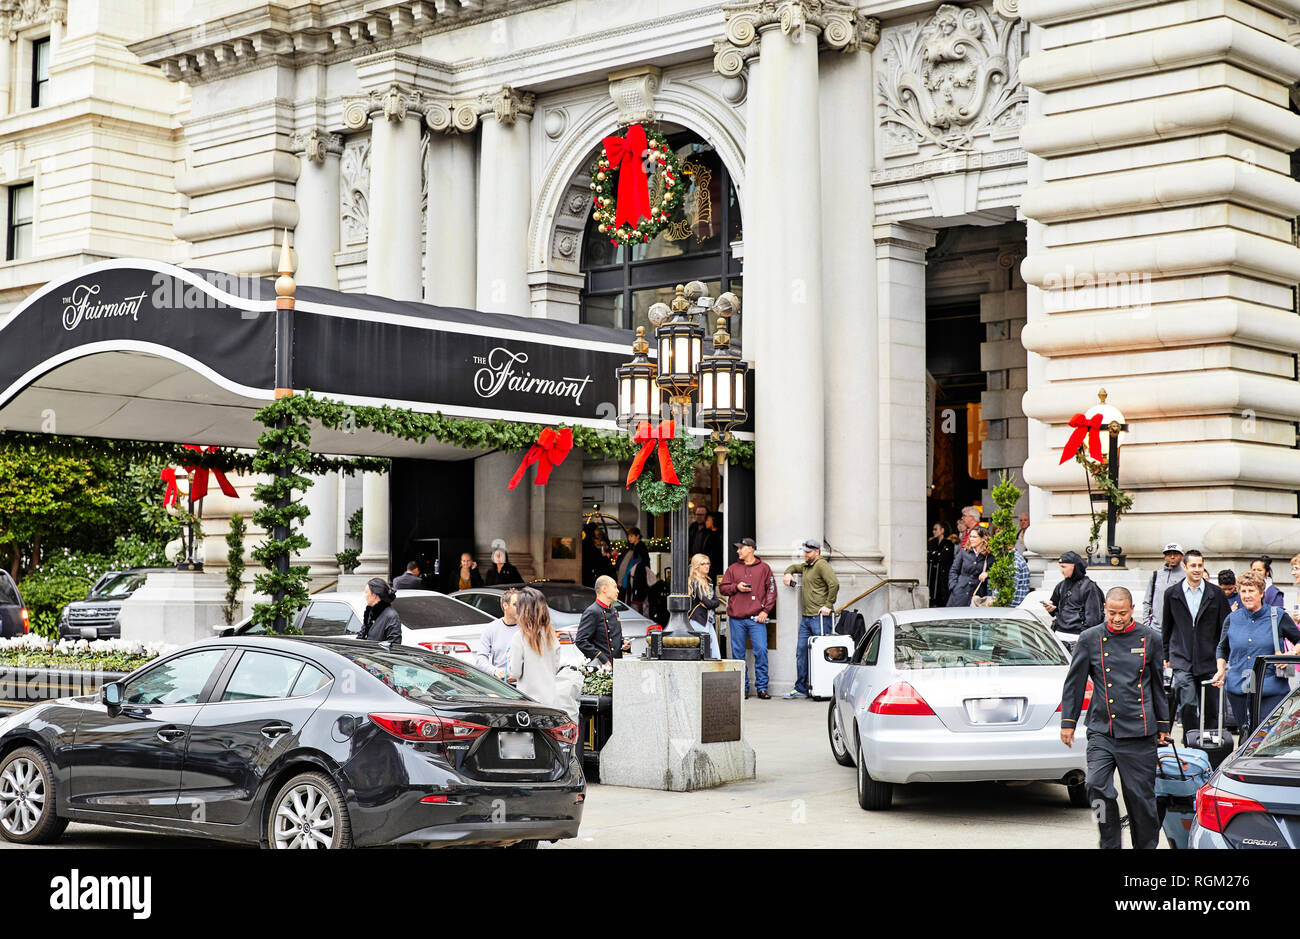 San Francisco, California, USA - December 15, 2018: Christmas for Tourists and Travelers at the busy Fairmont Hotel Stock Photo